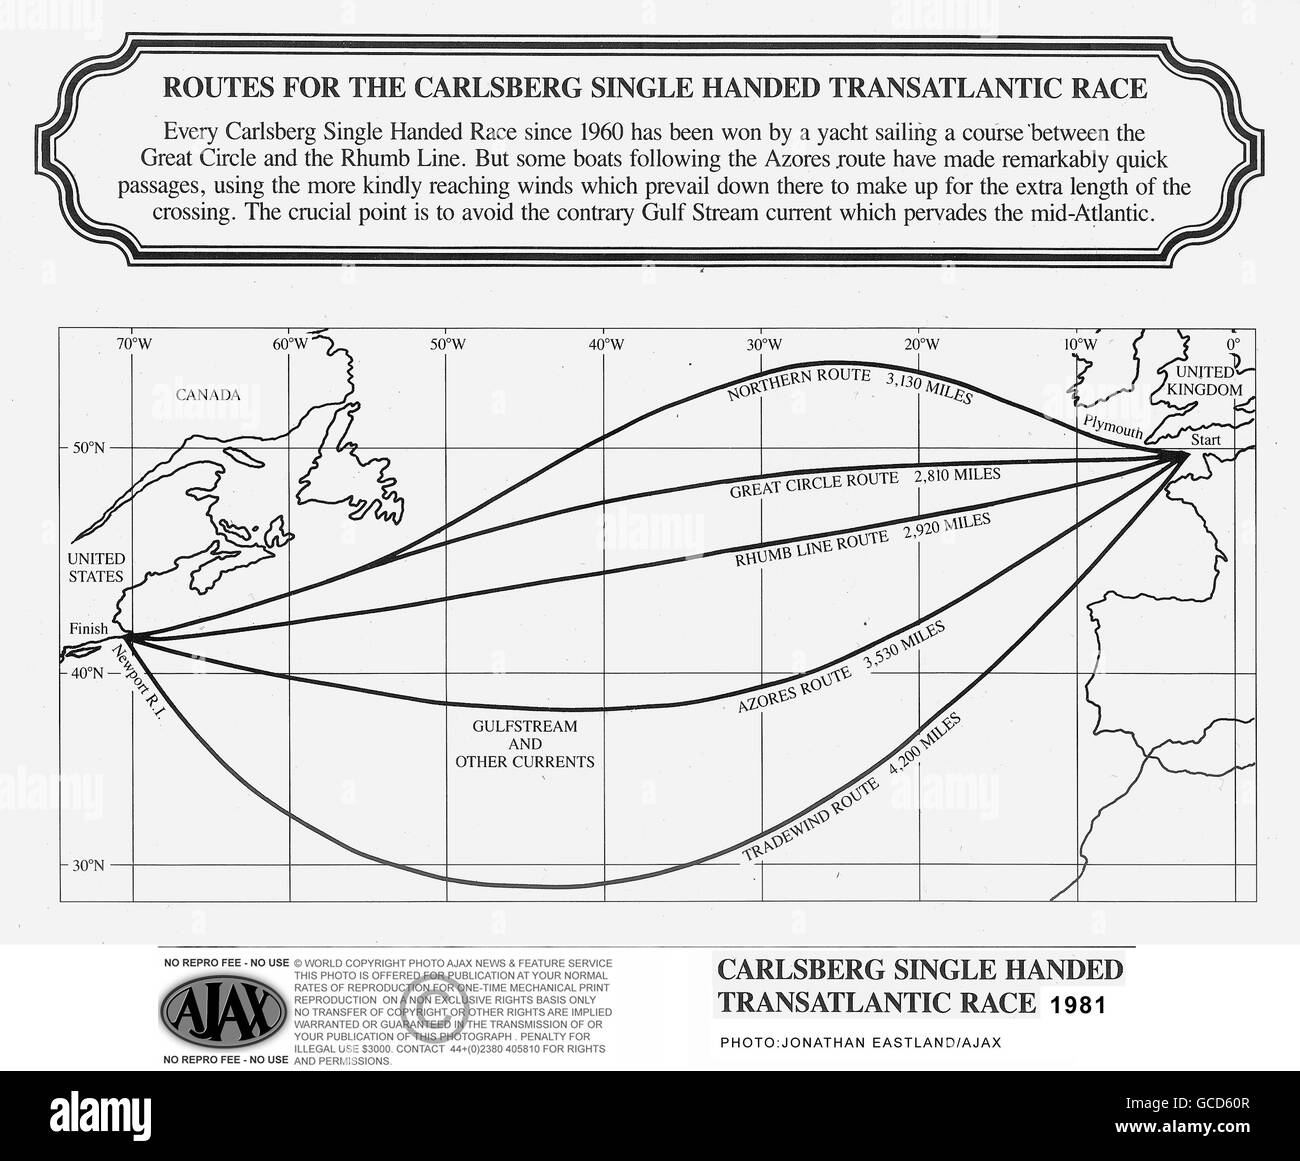 AJAX NEWS PHOTOS. 1981. PLYMOUTH, ENGLAND. - CARLSBERG TWO HANDED TRANSATLANTIC RACE - MAP OF PREVIOUS ROUTES OF RACING YACHTS FROM PLYMOUTH TO NEWPORT RHODE ISLAND ISSUED WITH RACE PROGRAMME. PHOTO:AJAX NEWS & FEATURE SERVICE REF:MAP 1981 Stock Photo